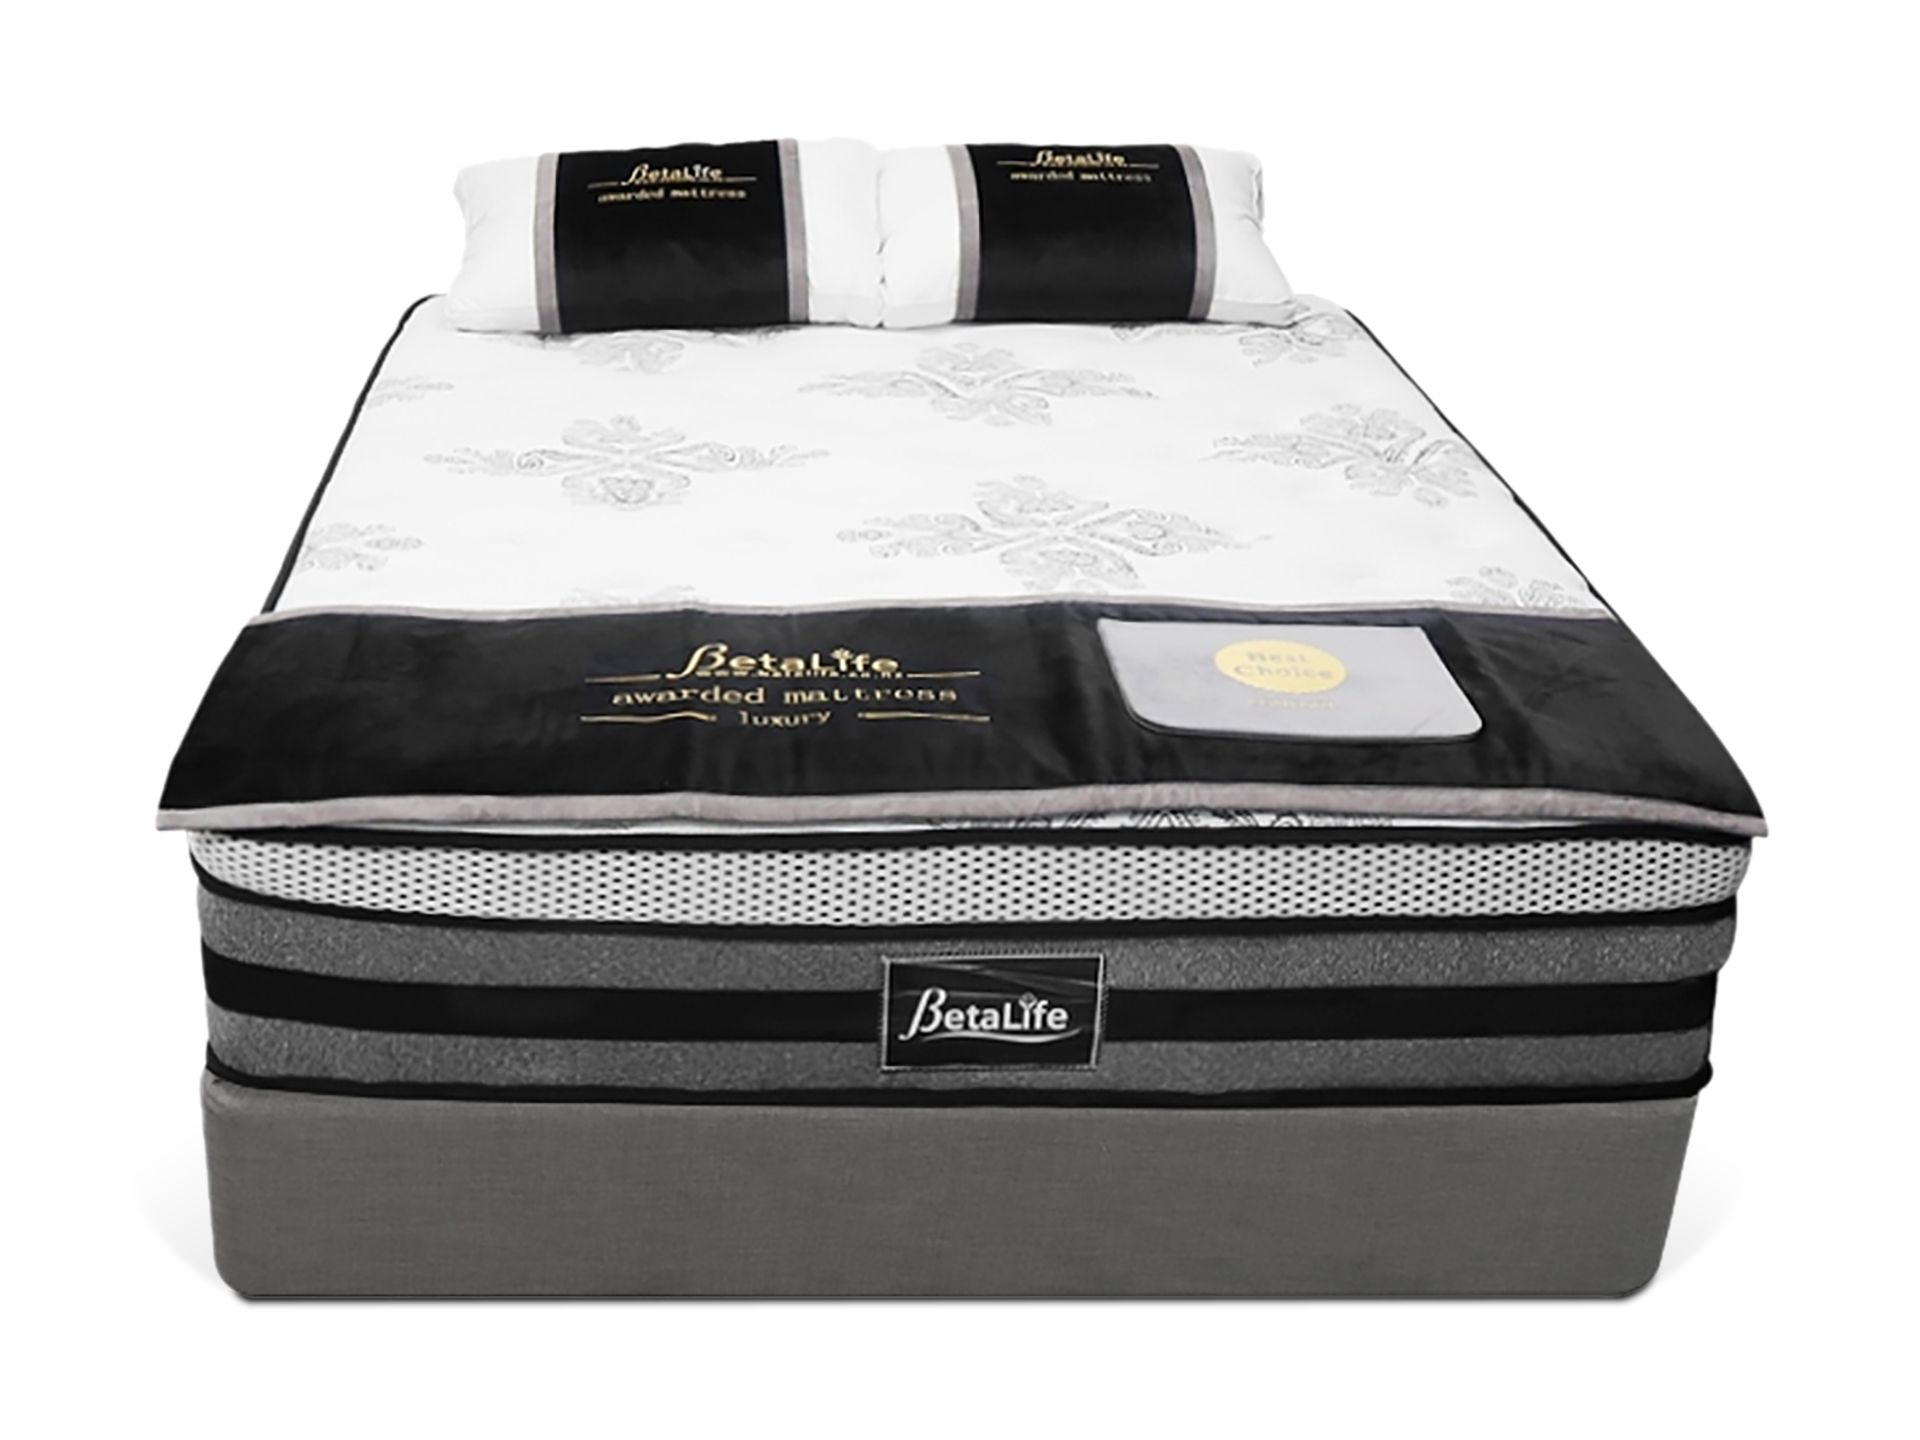 Vinson Fabric Double Bed with Luxury Latex Mattress - Grey